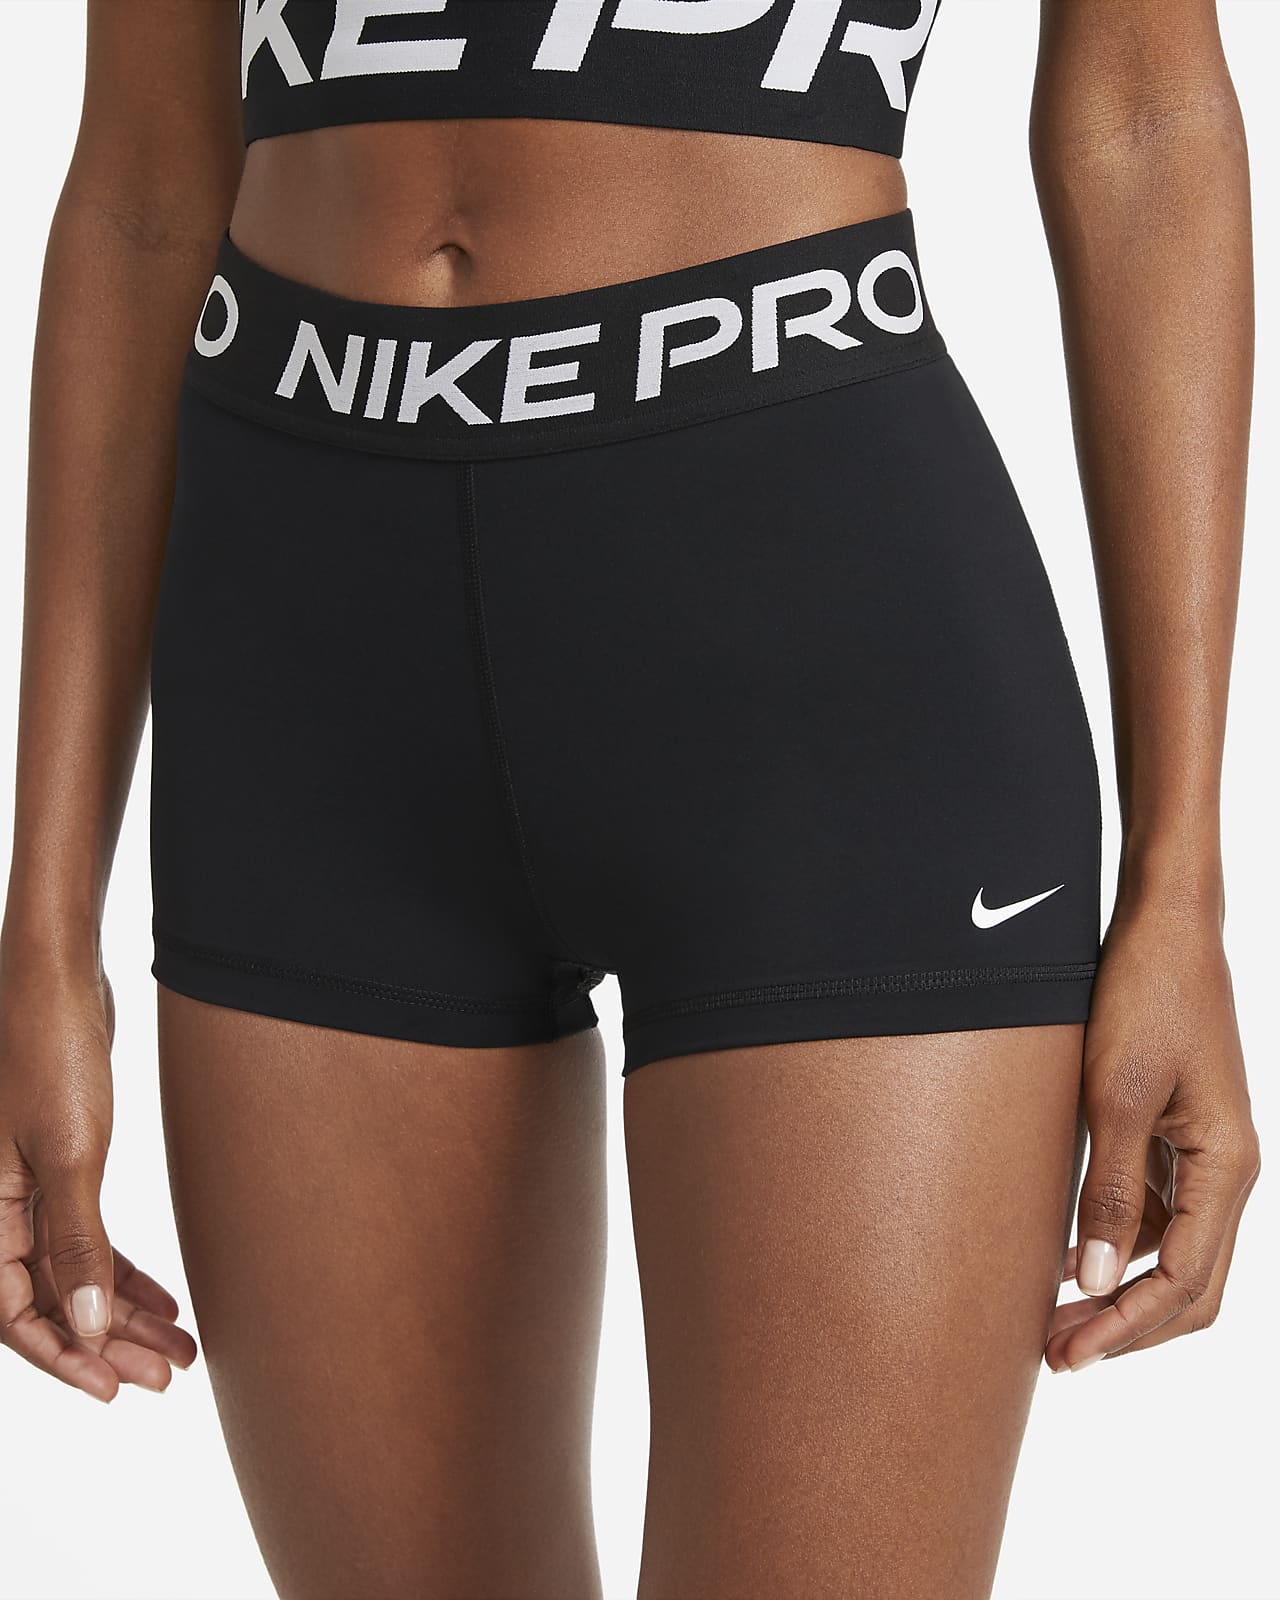 meget Faciliteter Traditionel Nike Pro Women's 8cm (approx.) Shorts. Nike LU